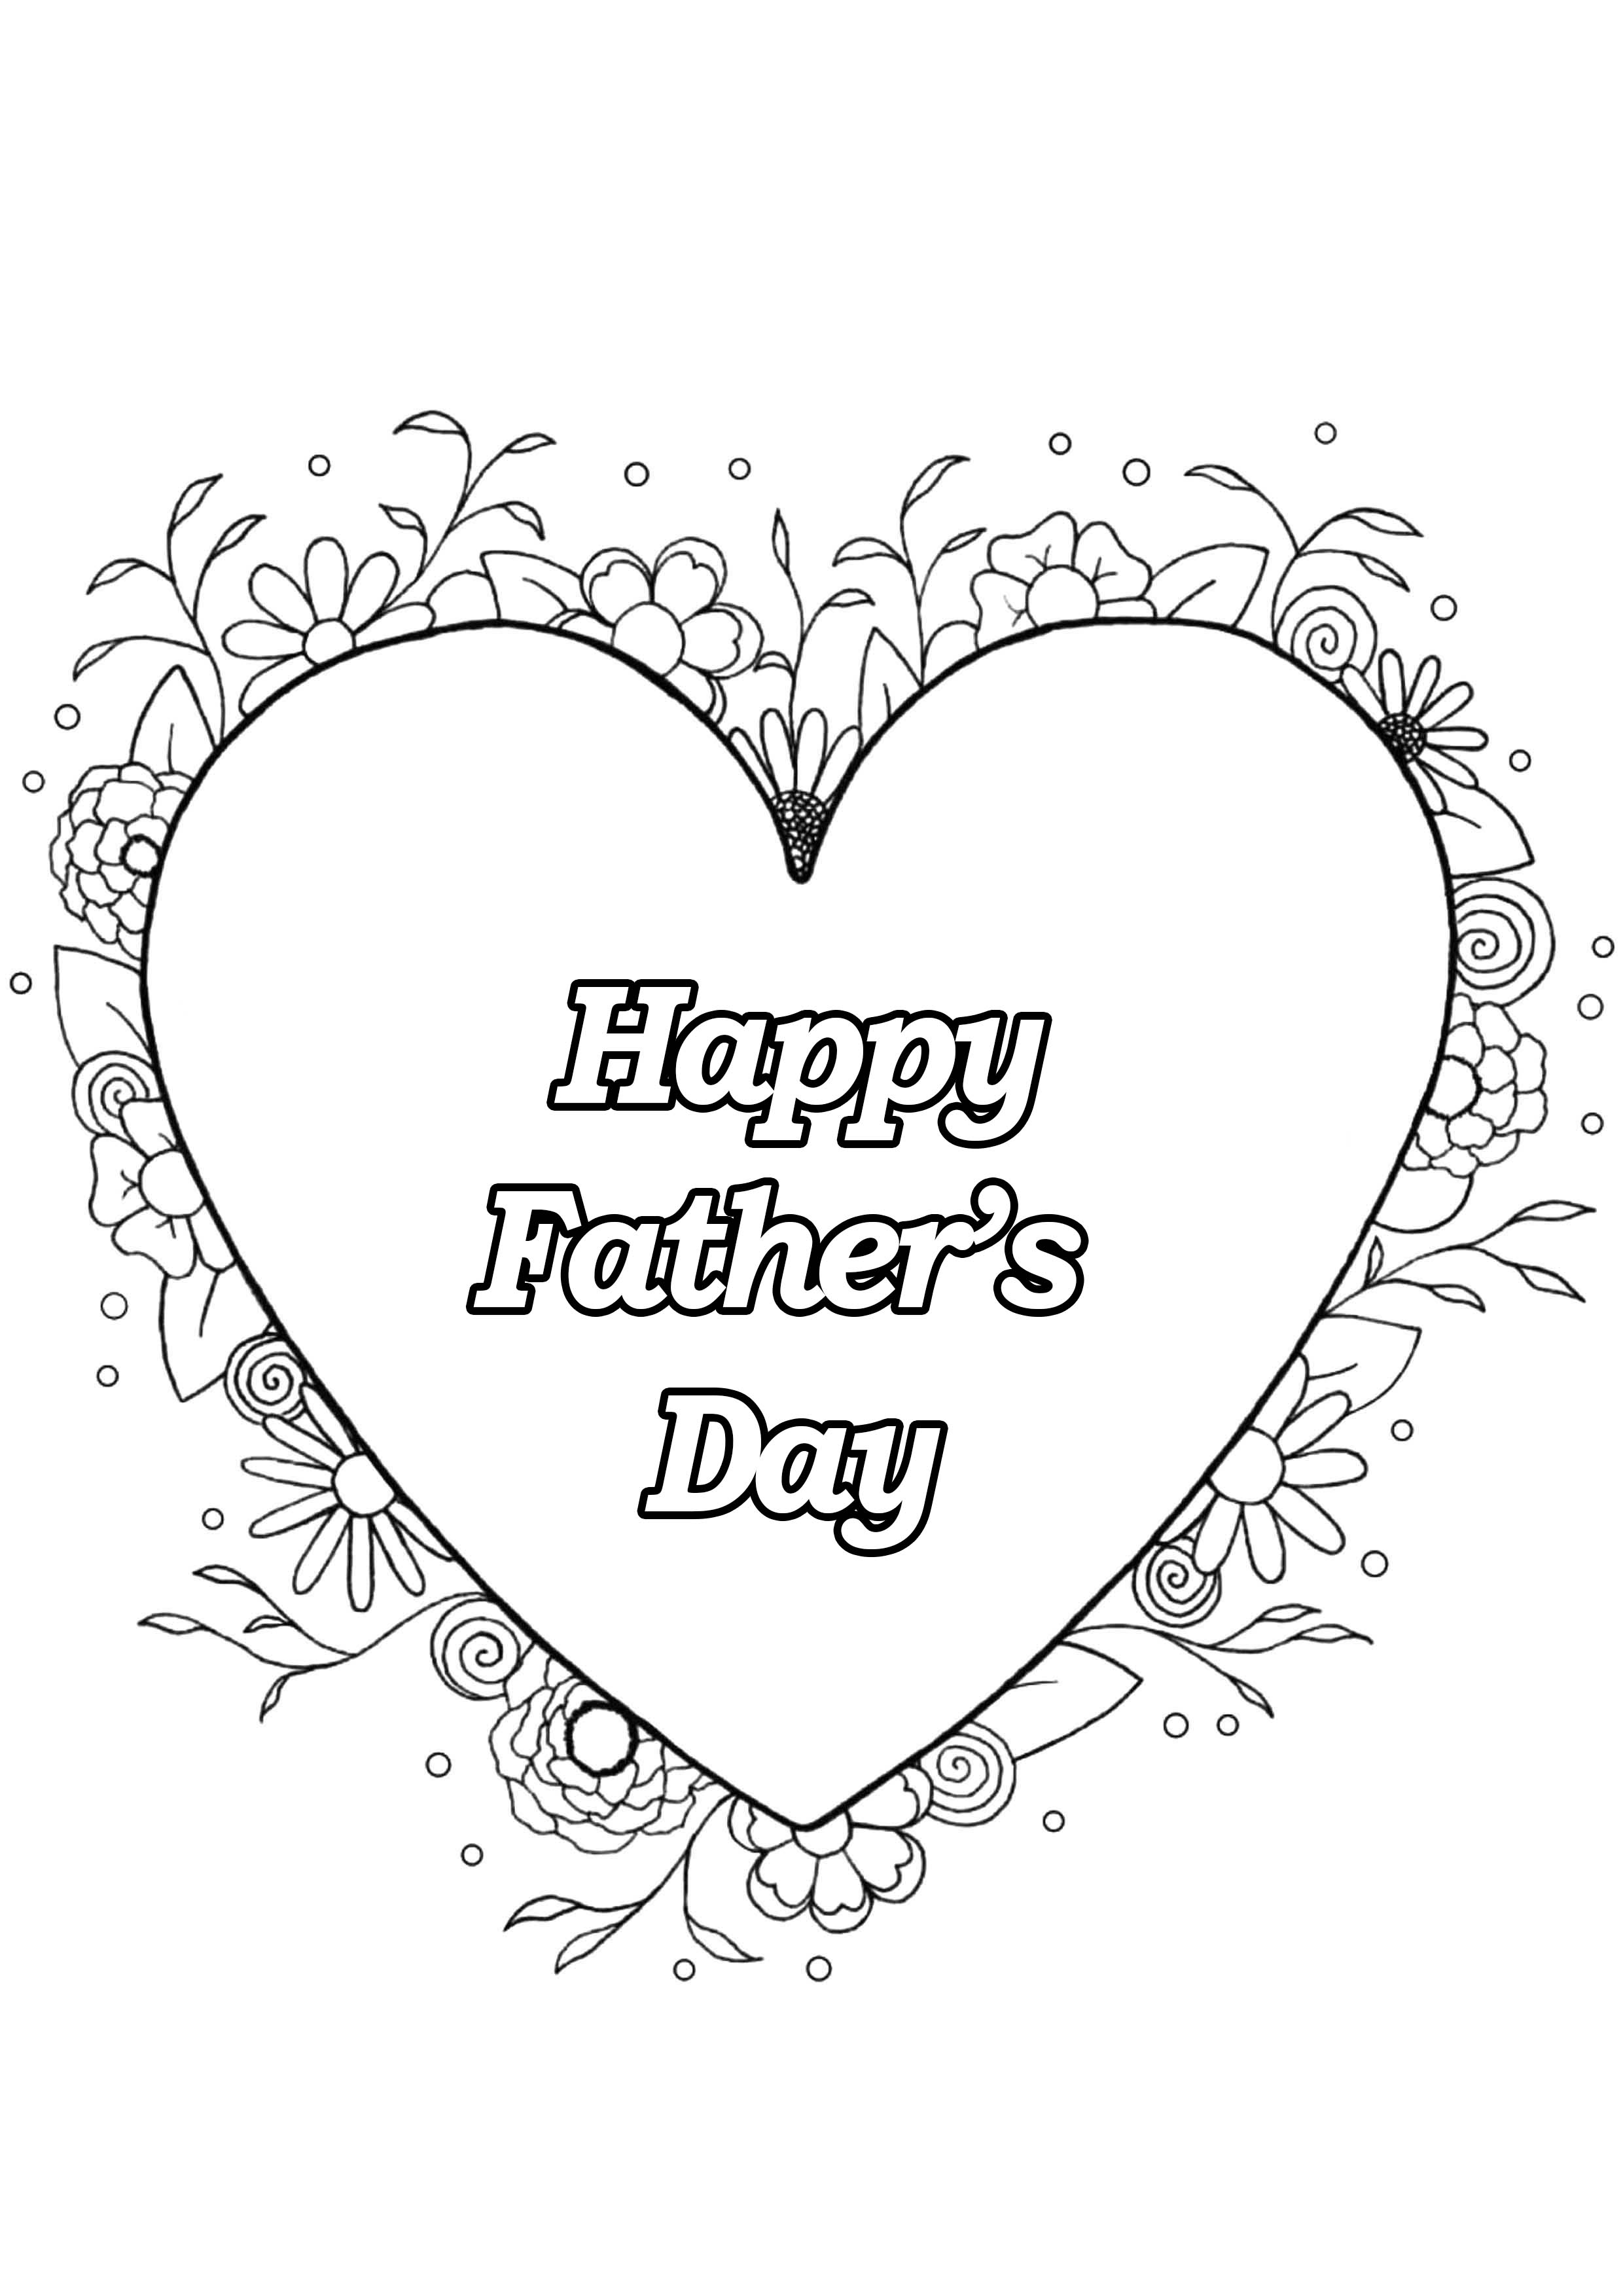 Father s day 4 - Father's Day Adult Coloring Pages